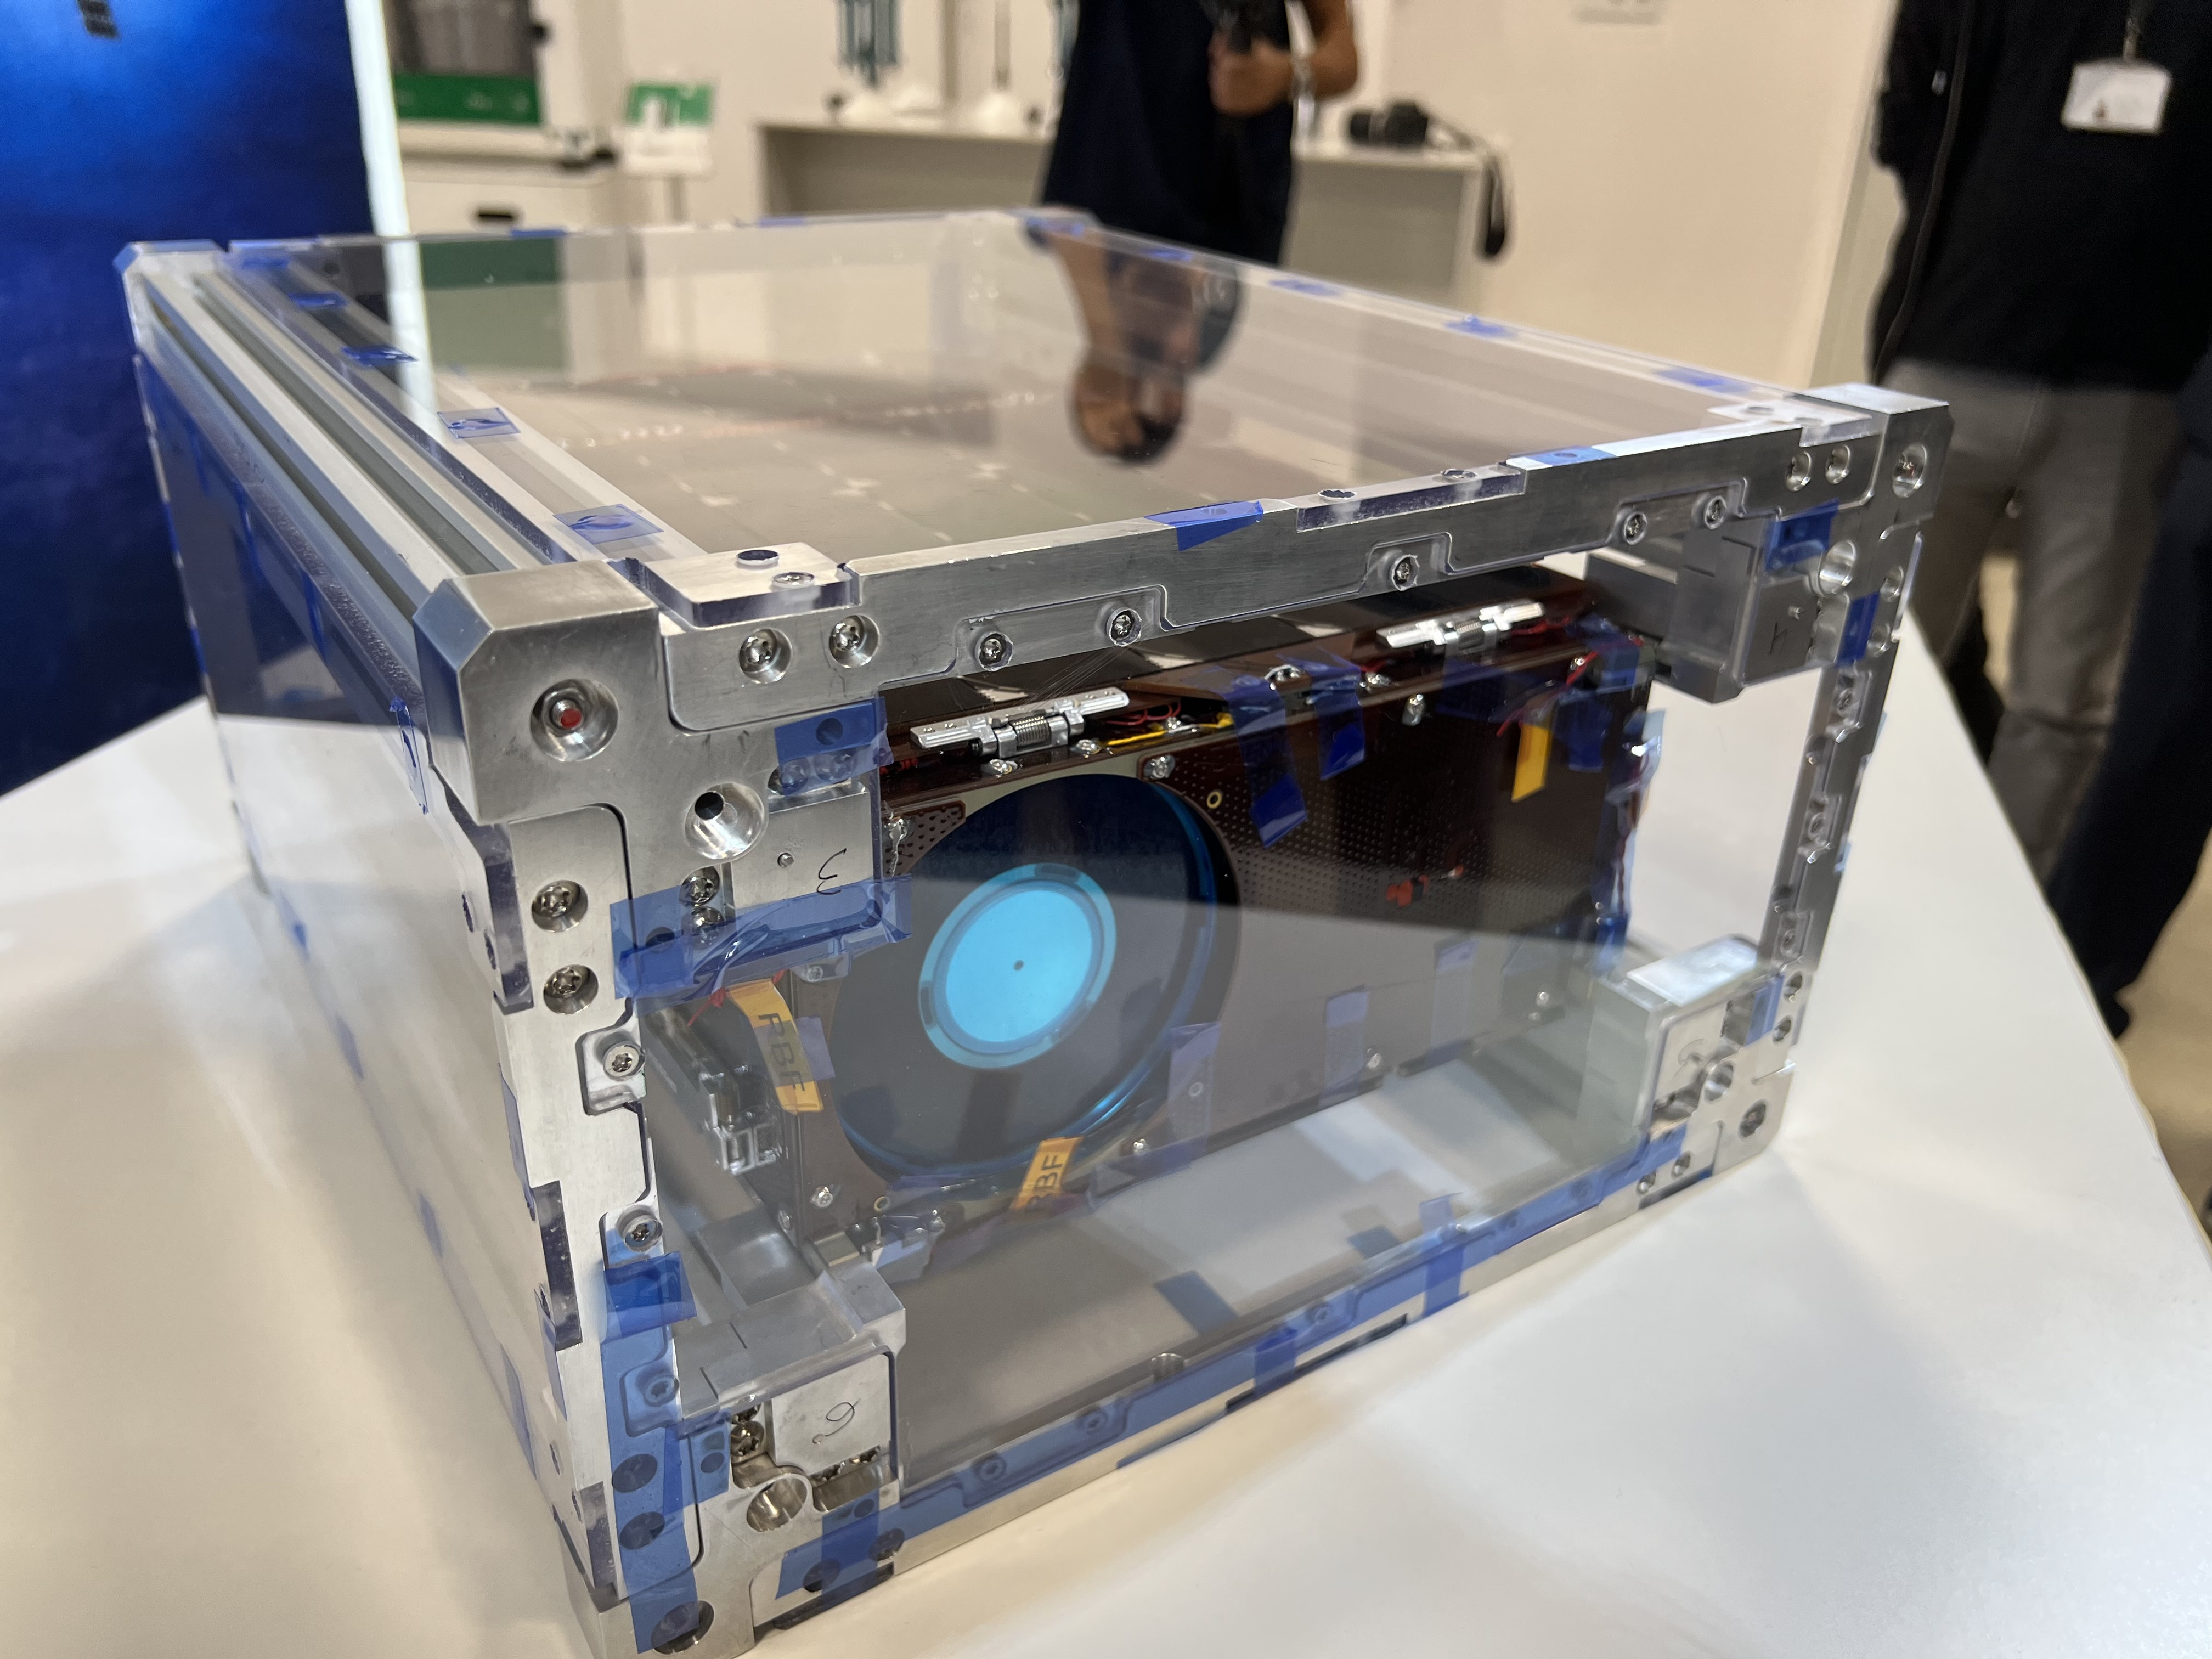 Catalonia's second nanosatellite 'Menut' in display at Open Cosmos' offices in Barcelona on October 11, 2022